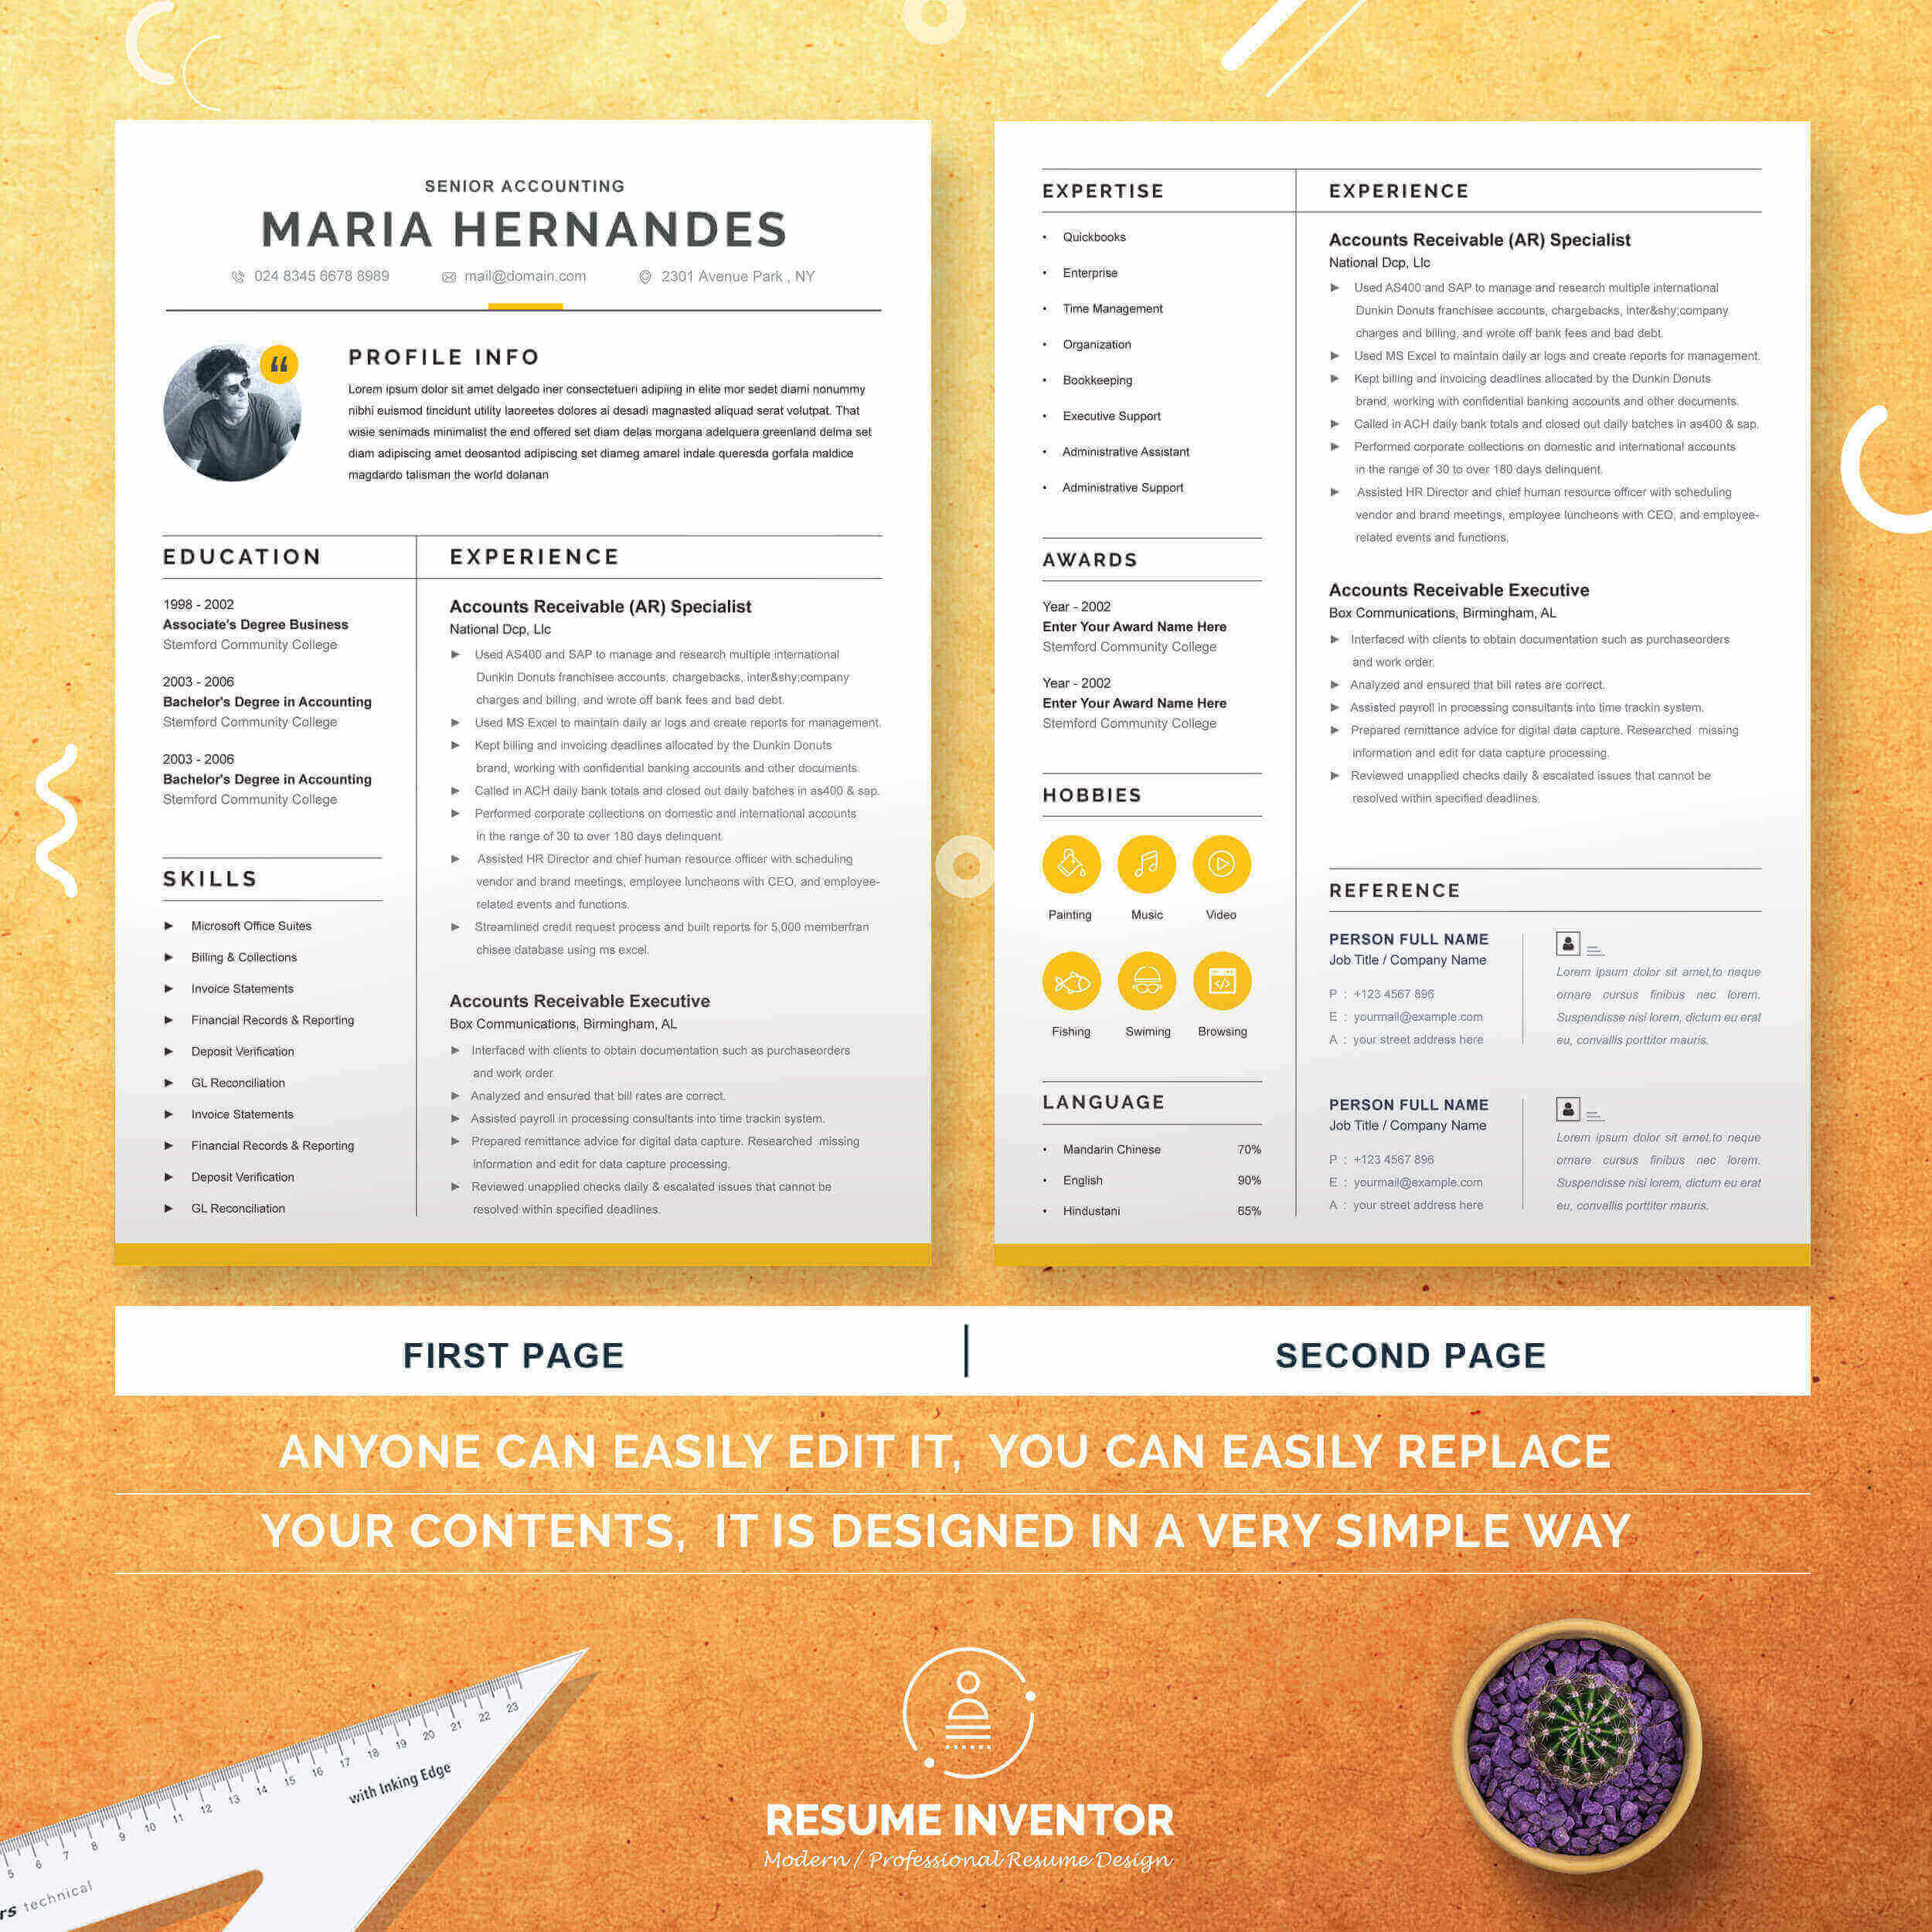 Senior Accounting CV Template | Resume Template preview image.